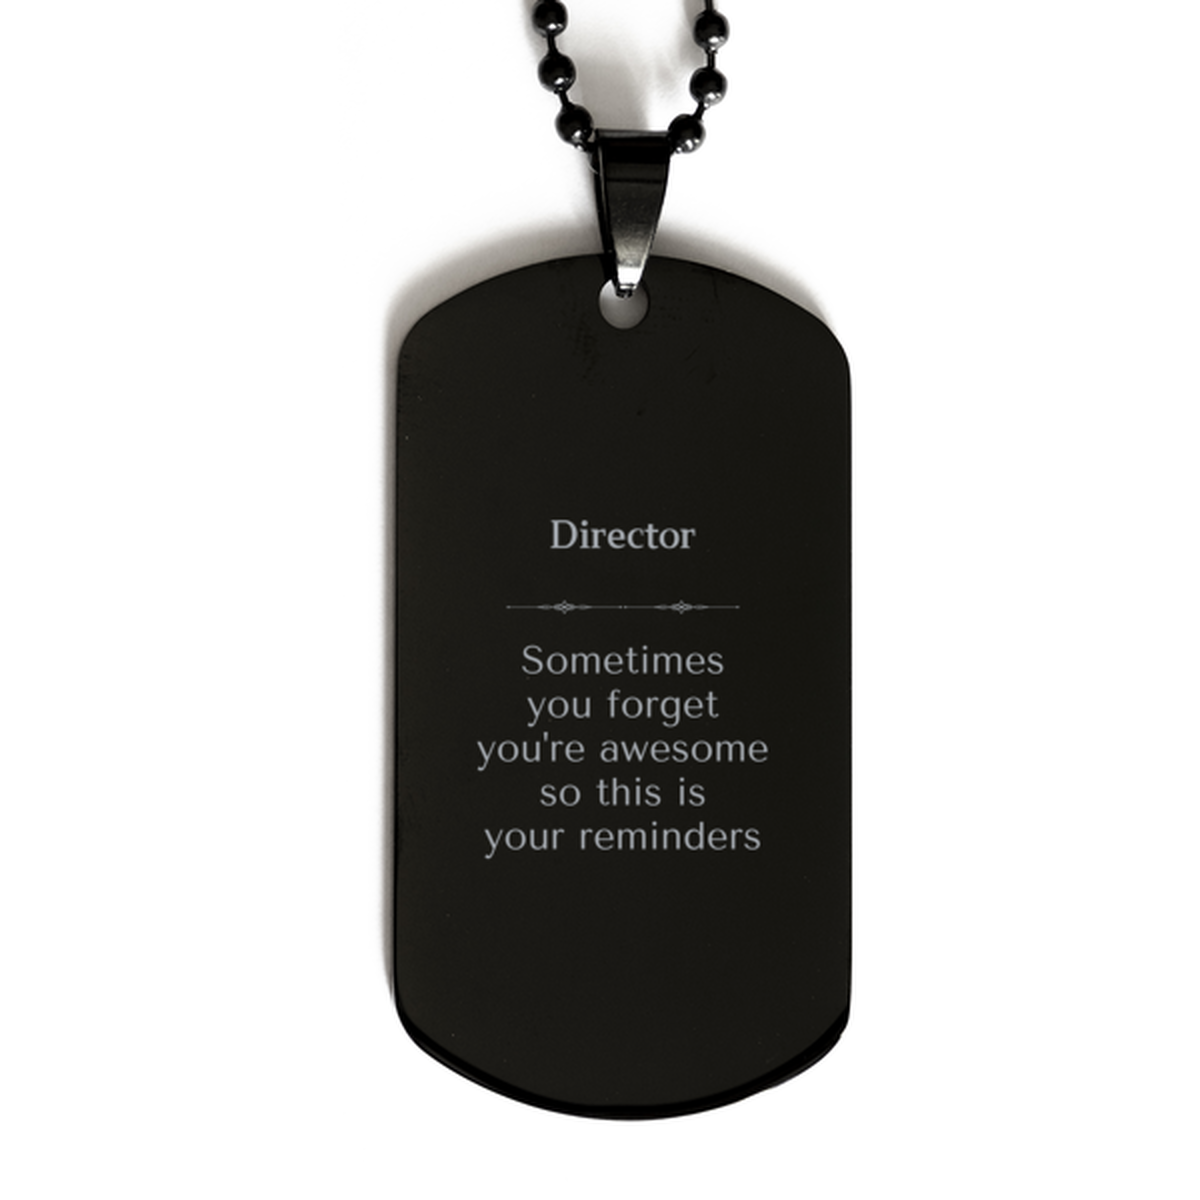 Sentimental Director Black Dog Tag, Director Sometimes you forget you're awesome so this is your reminders, Graduation Christmas Birthday Gifts for Director, Men, Women, Coworkers